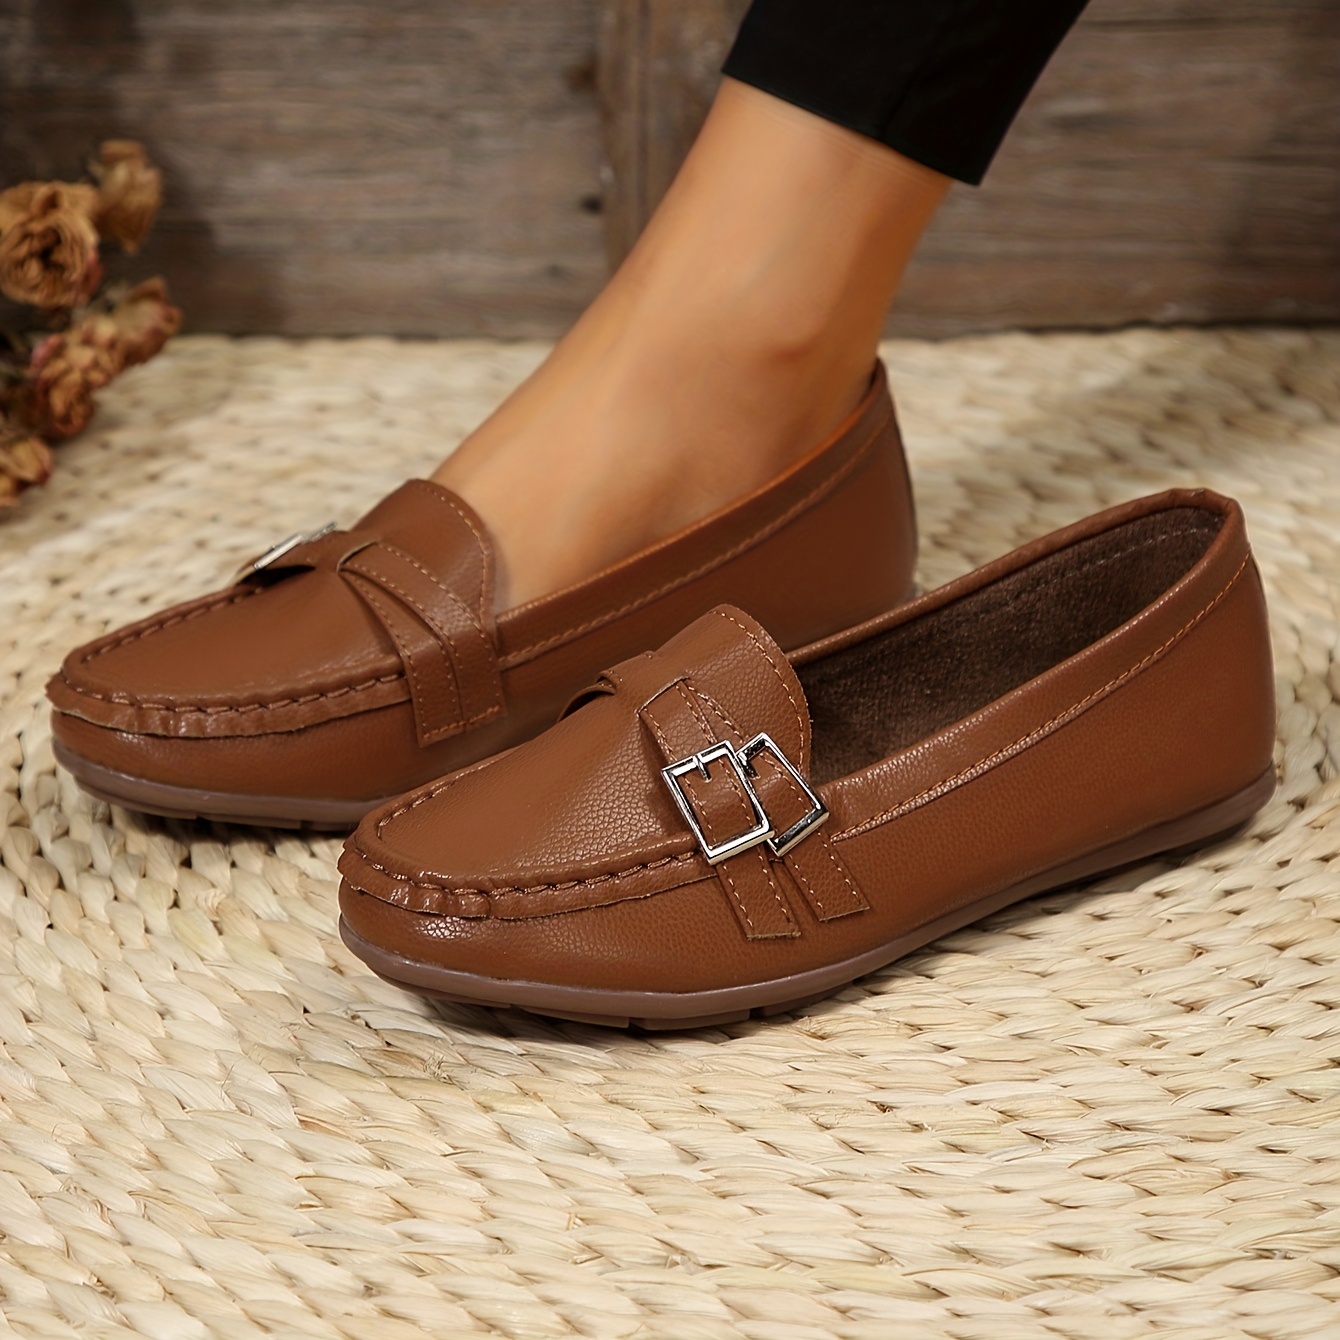 

Women's Solid Color Flat Shoes, Casual Buckle Strap Detailed Faux Leather Shoes, Lightweight Nurse Work Shoes